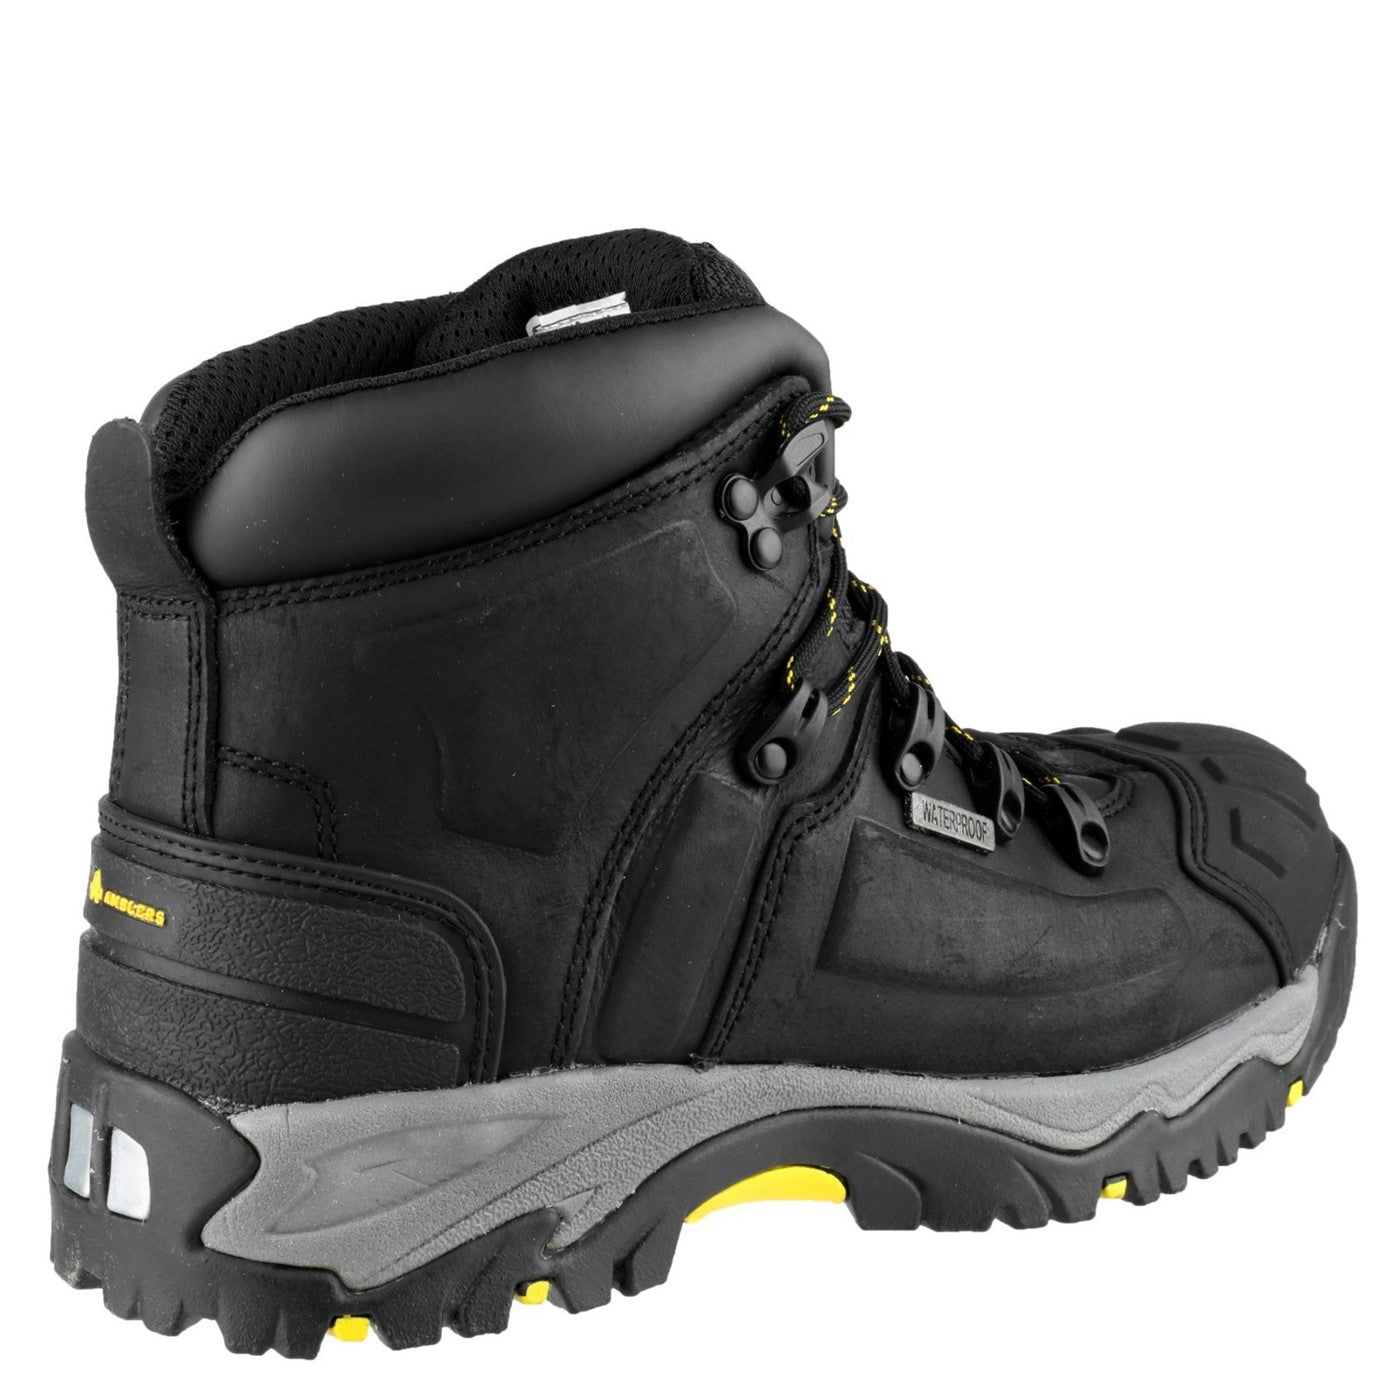 Unisex Amblers Safety AS803 Waterproof Wide Fit Safety Boot